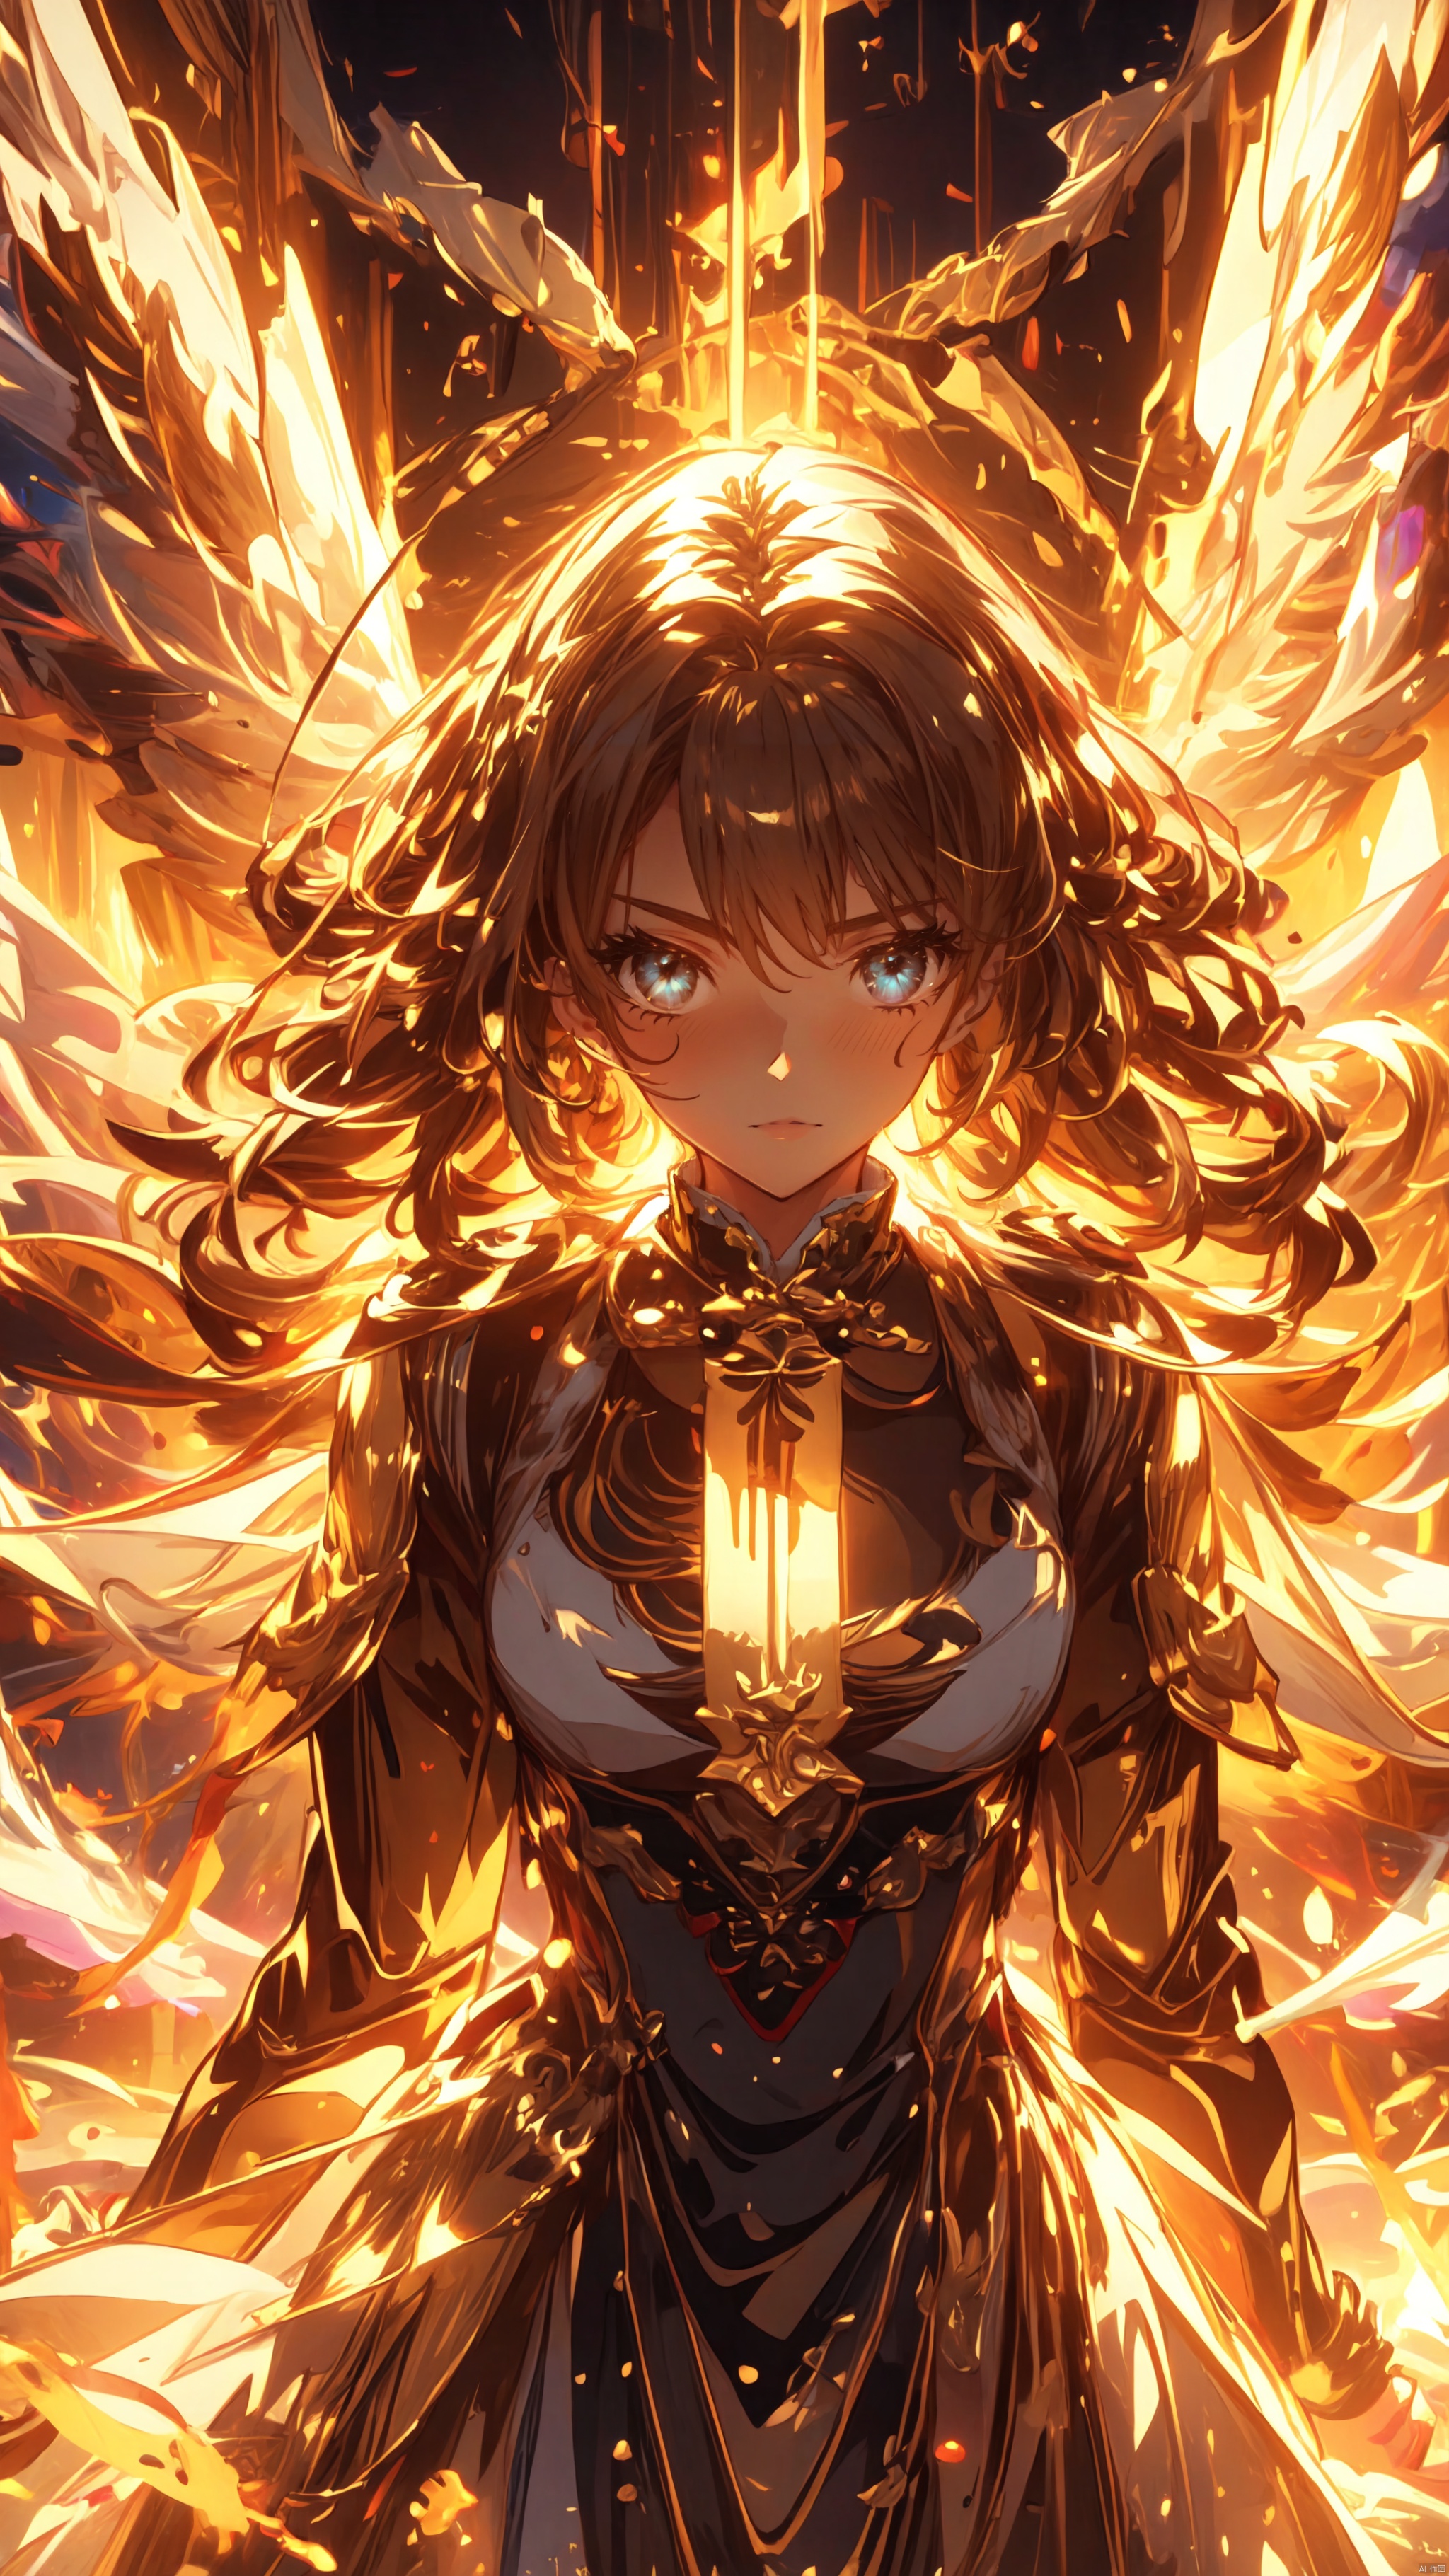  masterpiece, best quality, 1girl, a stunning anime wallpaper featuring the face of an enigmatic character with glowing eyes, long hair,surrounded by swirling flames and ethereal energy waves. Focus on materials that evoke warmth or luxury, such as silk or velvet. Vector illustration in the style of anime, with a dark blue background color, segaev, r1ge, taoist, (\shen ming shao nv\), jiqing, maolilan,wings